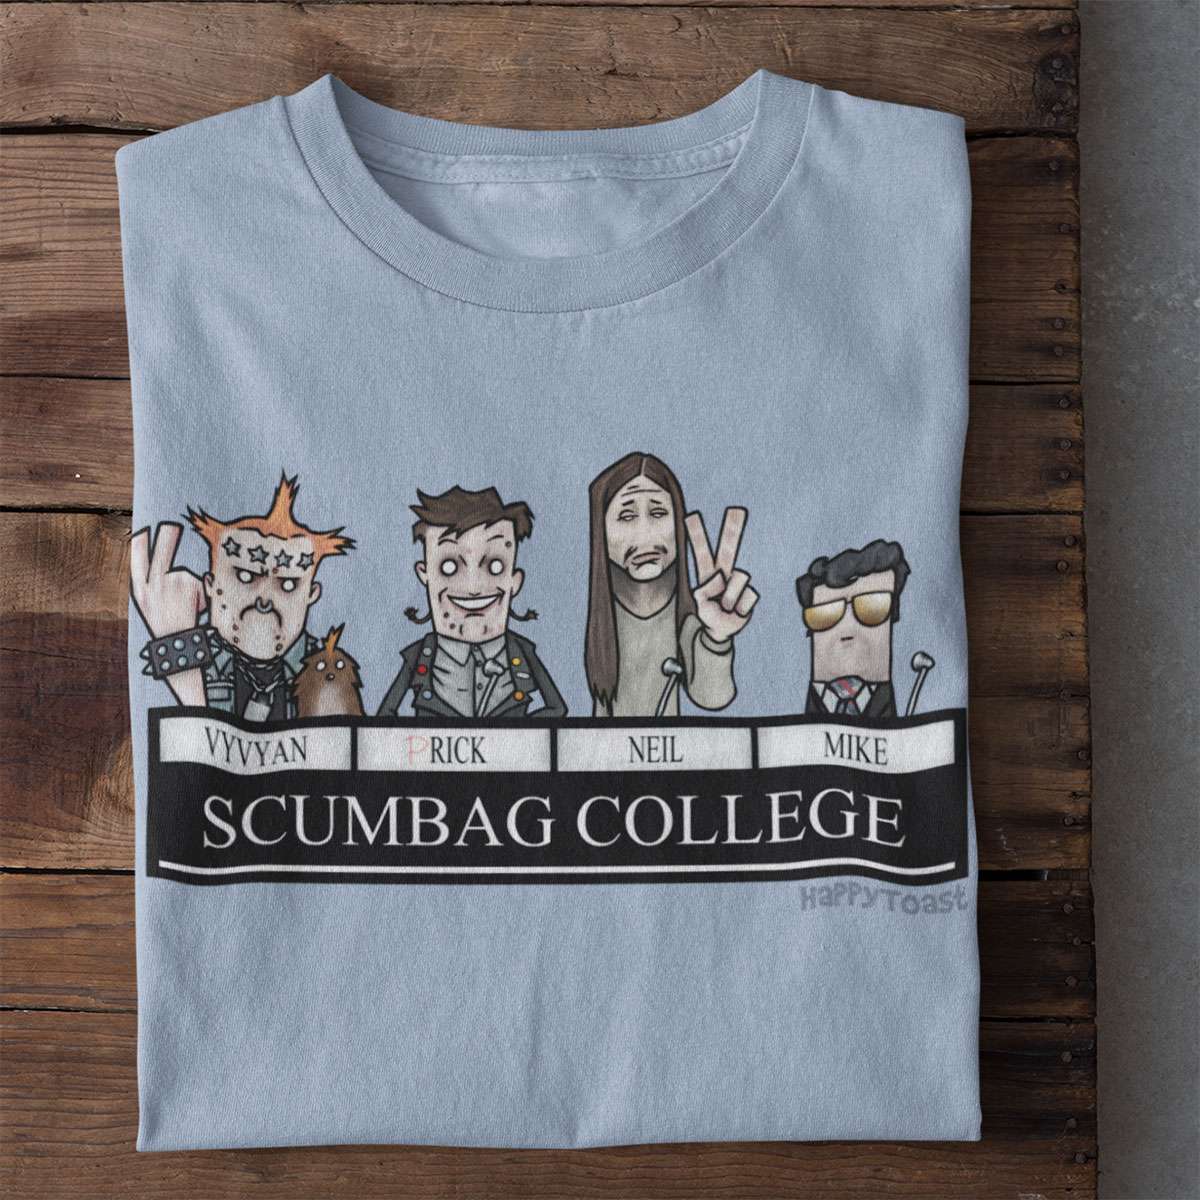 The Young Ones Scumbag College - Scumbag College Vyvyan Rick Neil Mike